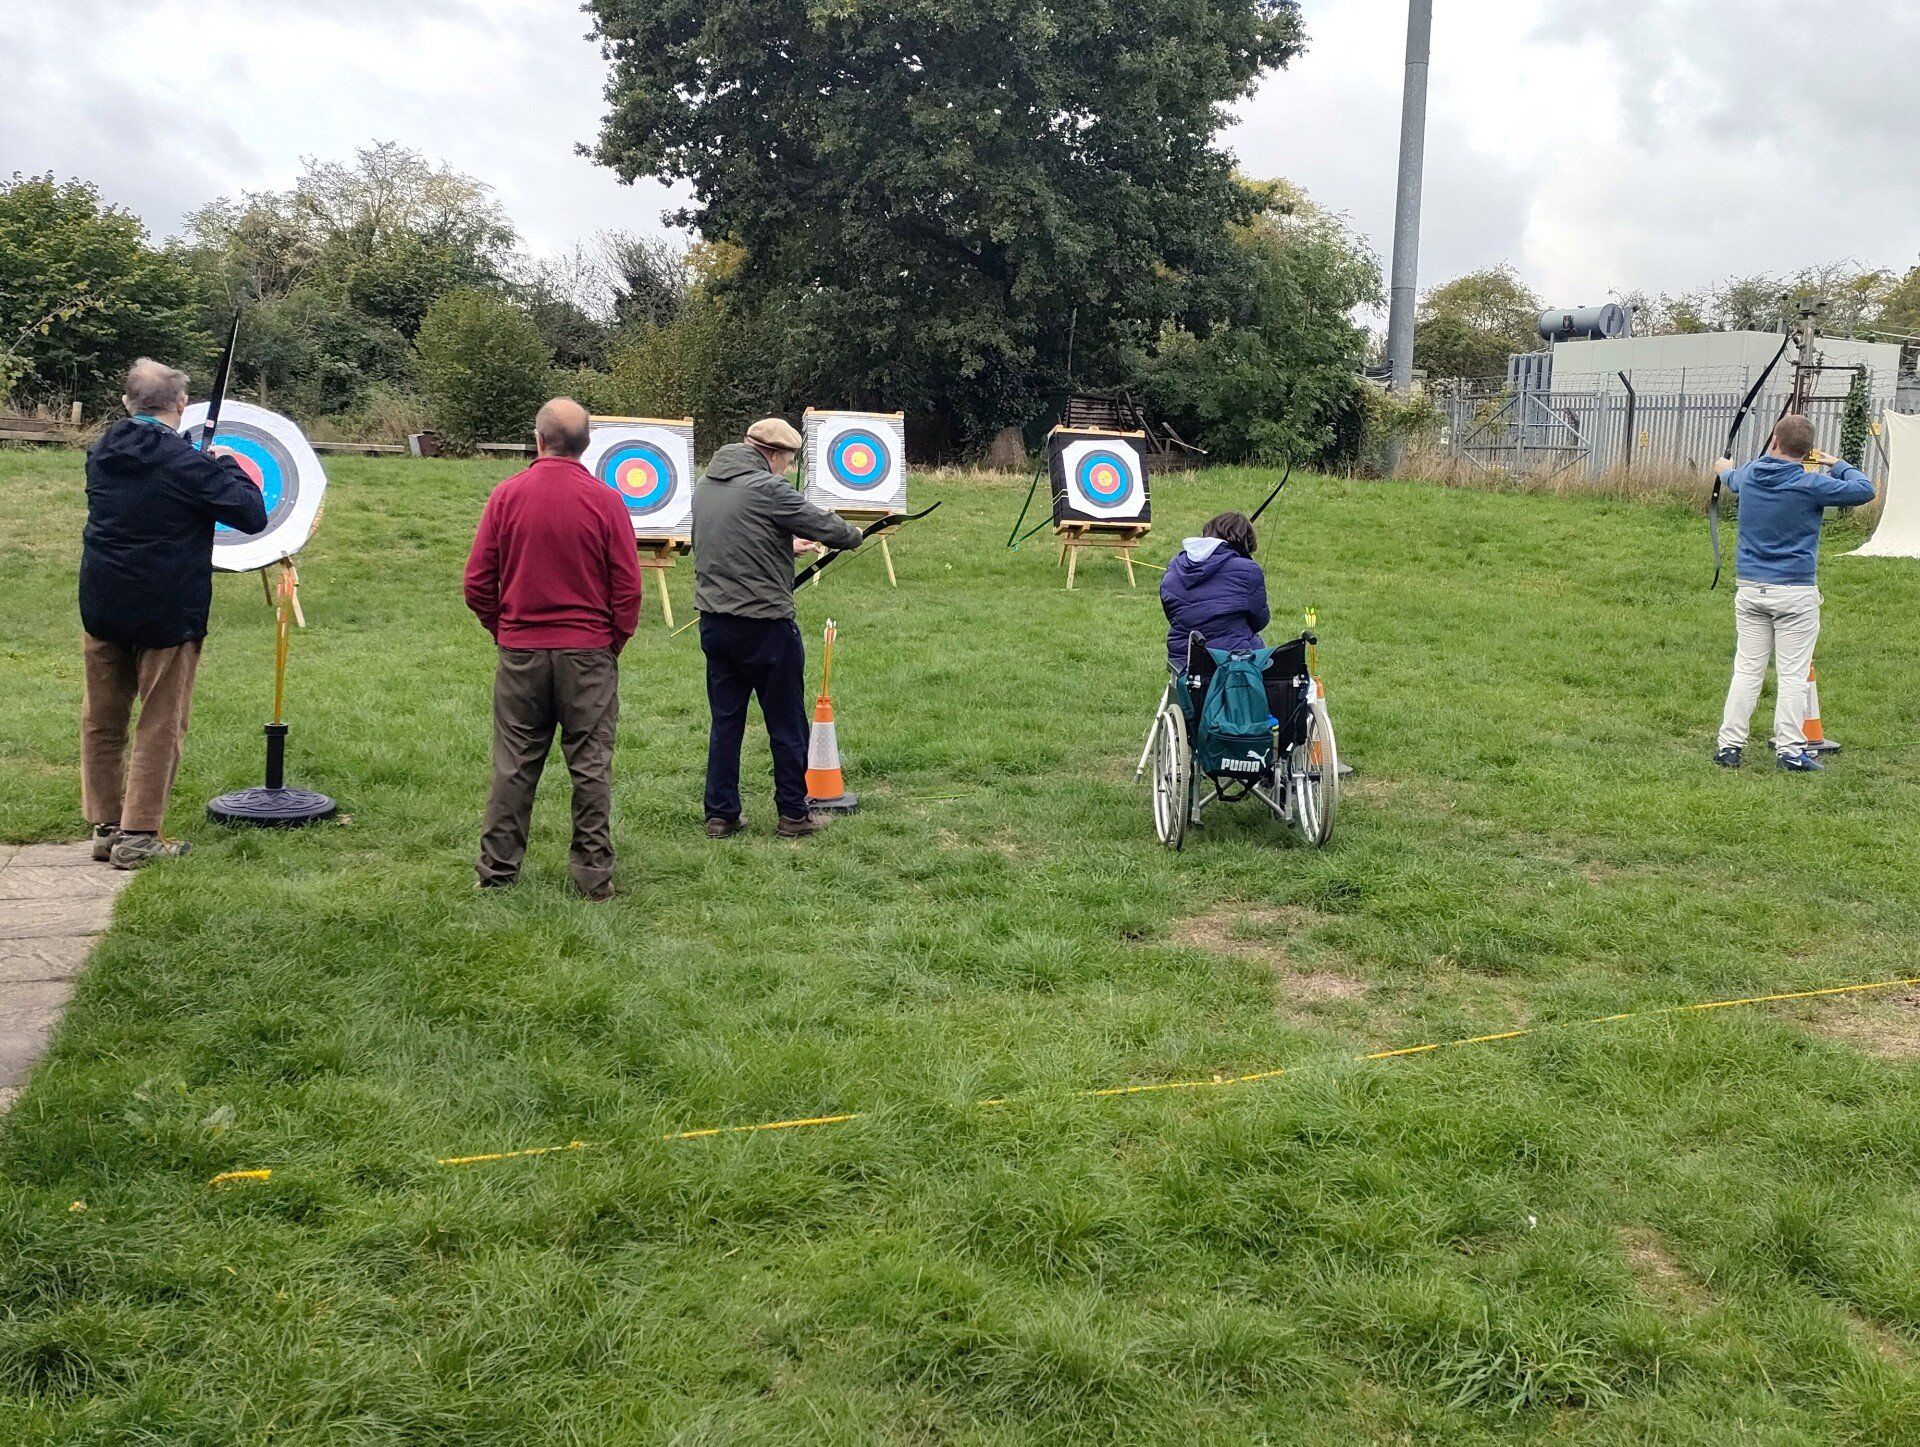 Outside in the filed: FNC members including one in wheelchair, with volunteer archery instructor, take aim at  archery targets